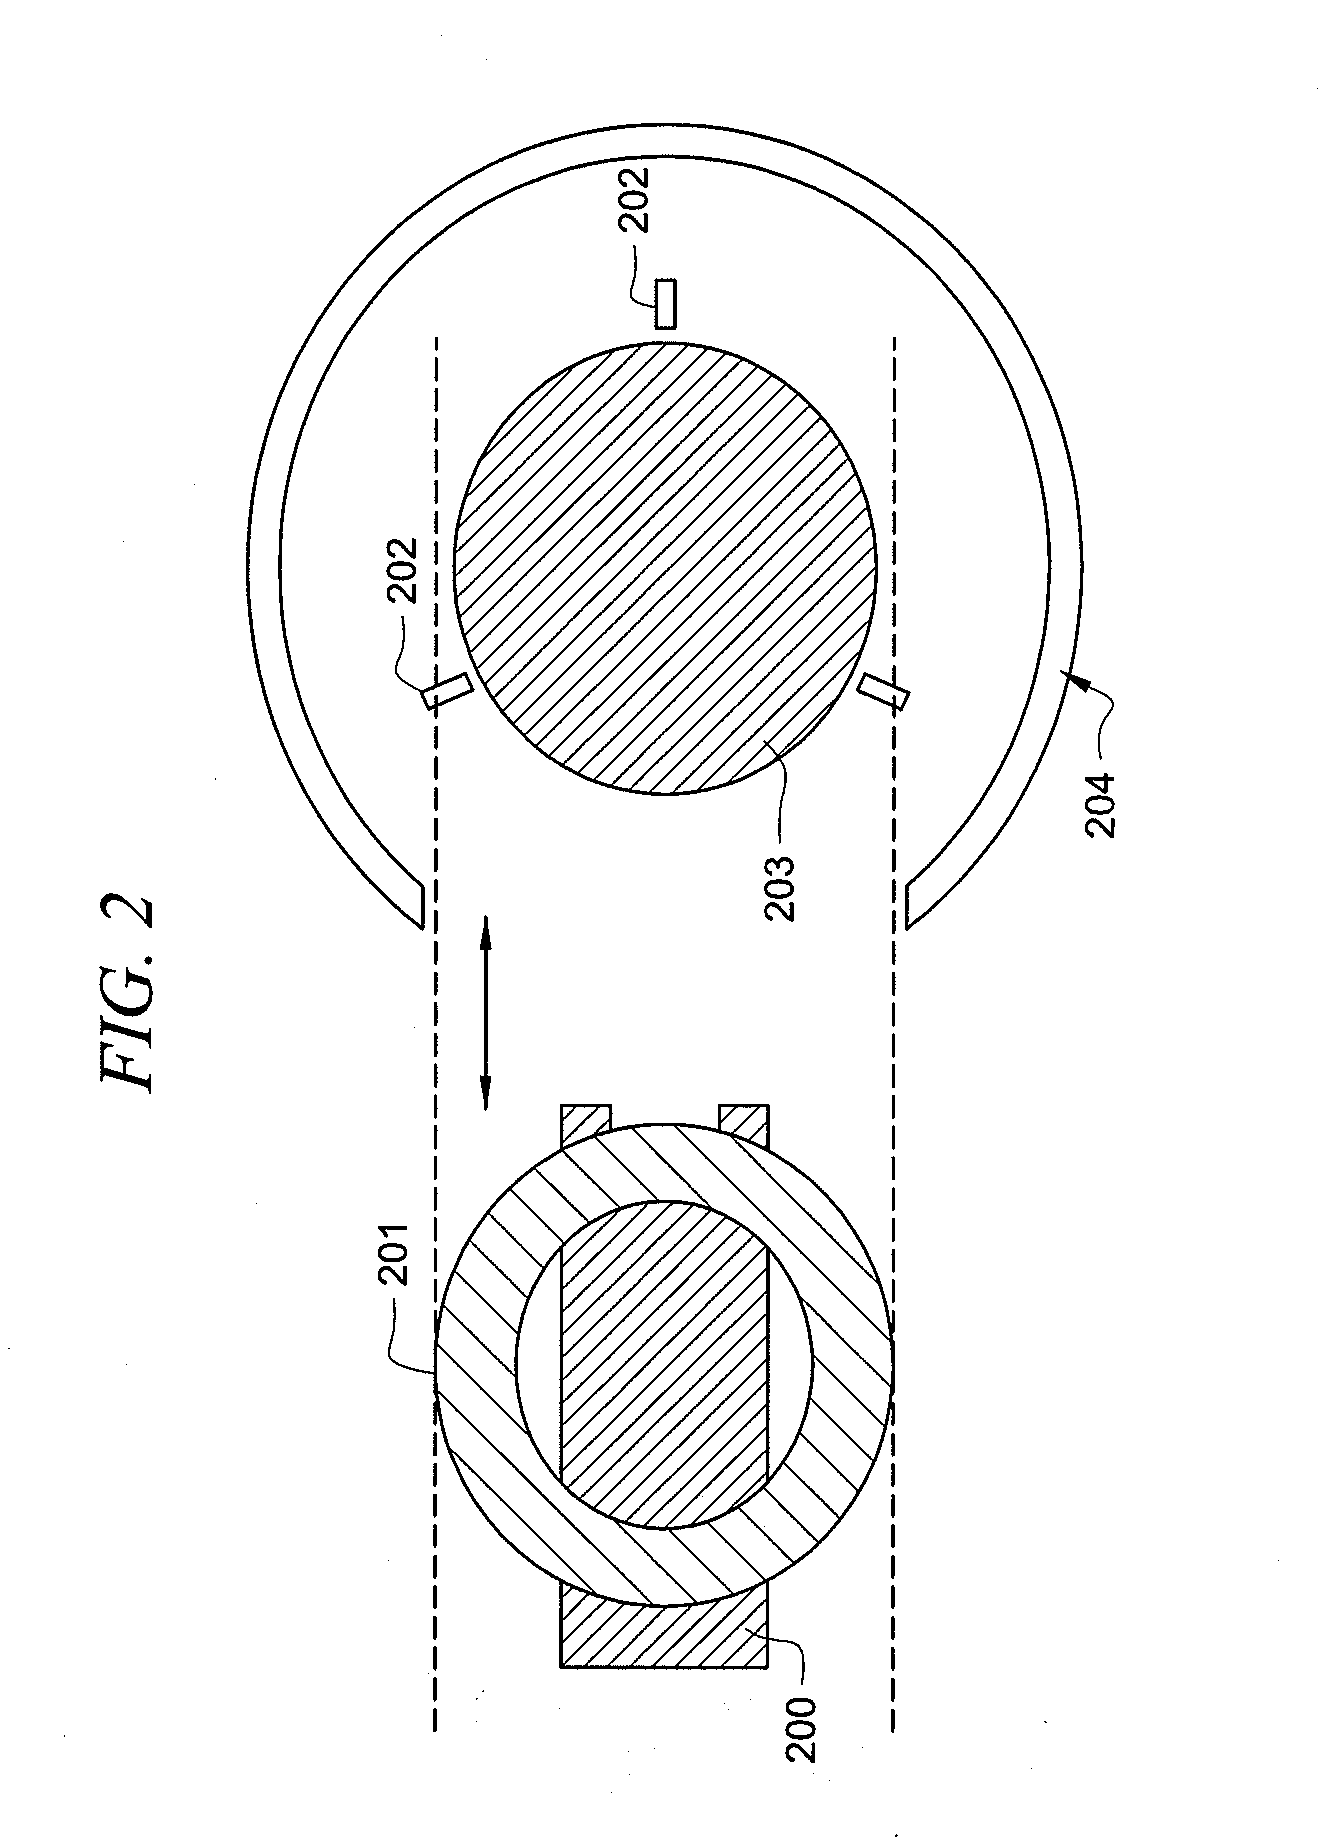 Automated systems and methods for adapting semiconductor fabrication tools to process wafers of different diameters